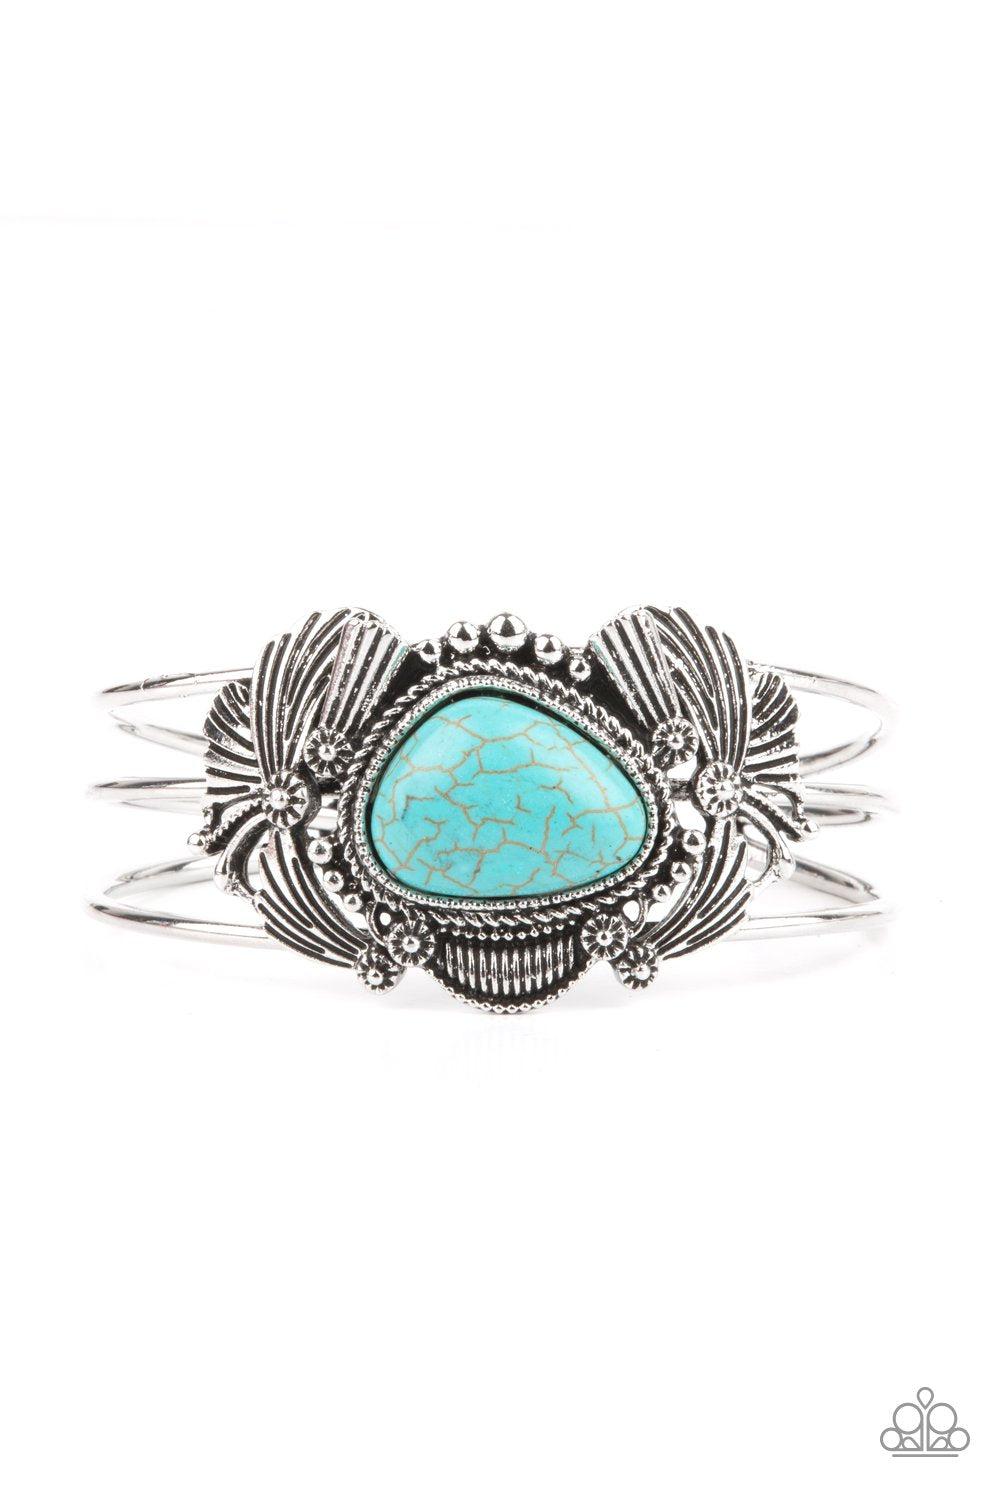 Western Wonderland Turquoise Blue Stone and Silver Cuff Bracelet - Paparazzi Accessories- lightbox - CarasShop.com - $5 Jewelry by Cara Jewels